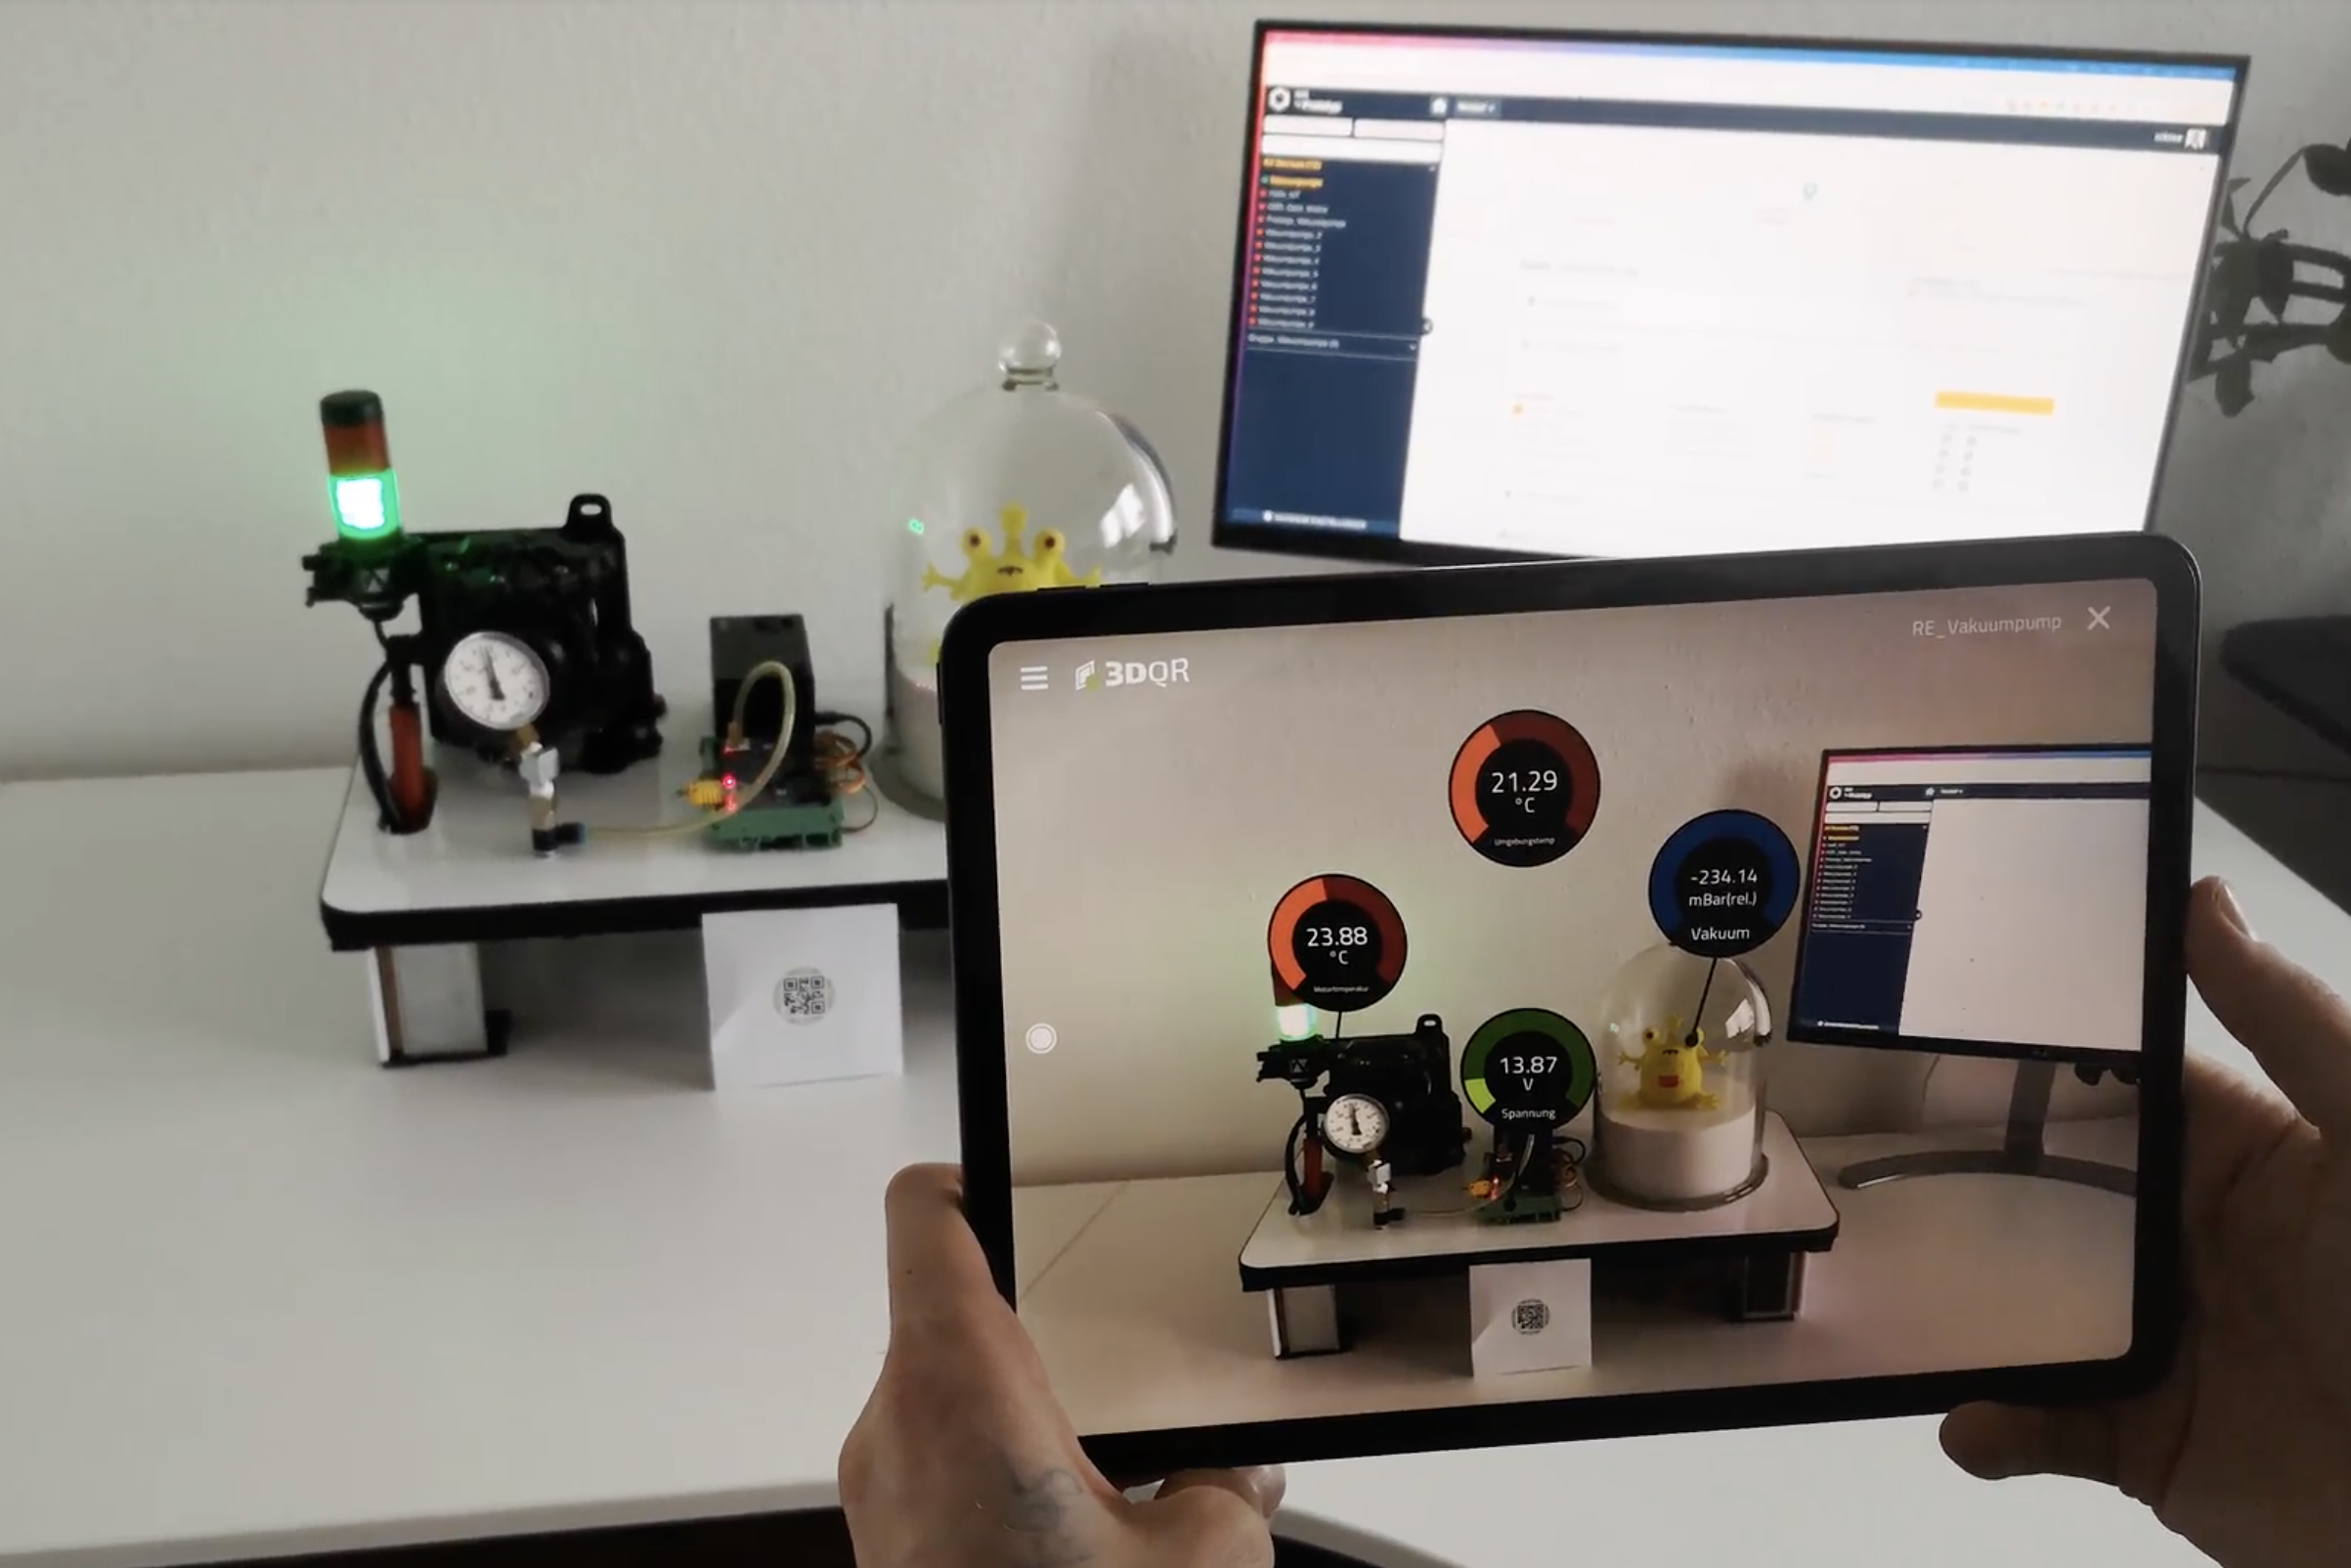 IoT Data from the Record Evolution IoT Studio displayed in the 3DQR Augmented Reality App